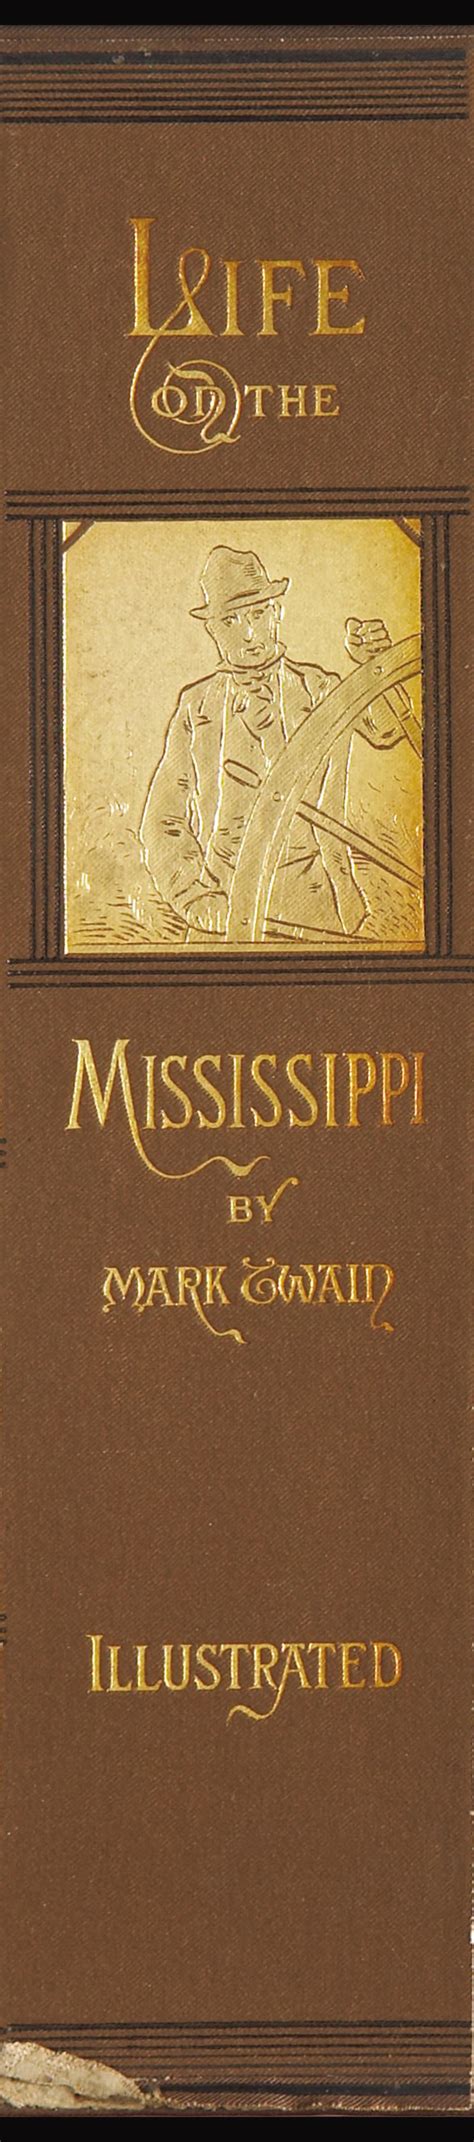 Mark twain was born samuel langhorne clemens, on november 30, 1835, in a town called florida, missouri. Mark Twain Life on the Mississippi Enlarged Book Spine ...